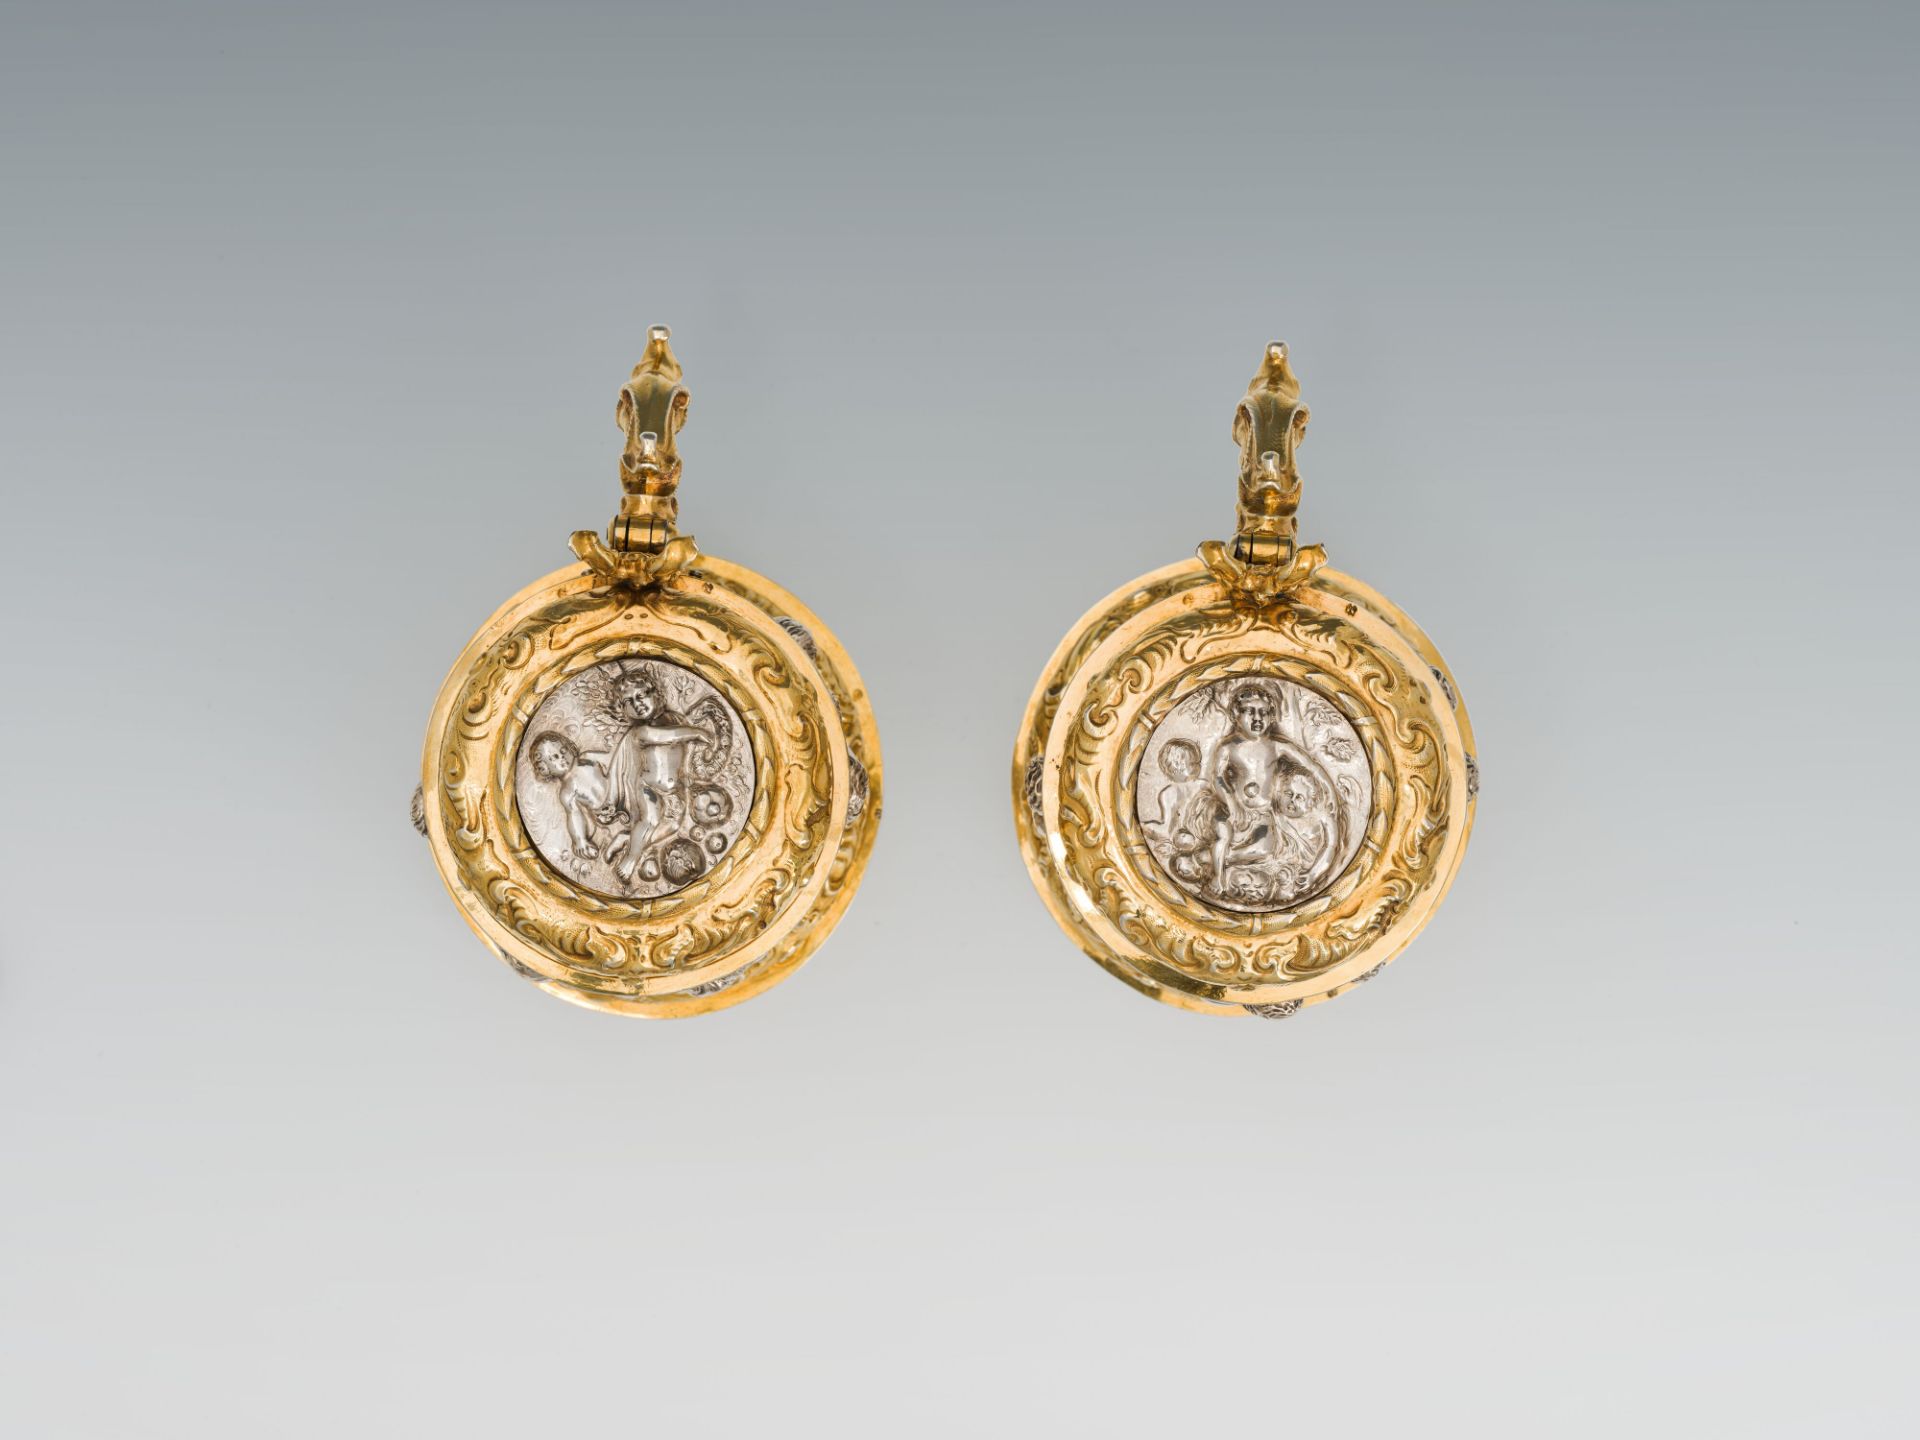 Pair of tankardsHamburg, c. 1670silver, partially gilded; inside with engraved english emblem ( - Image 3 of 4